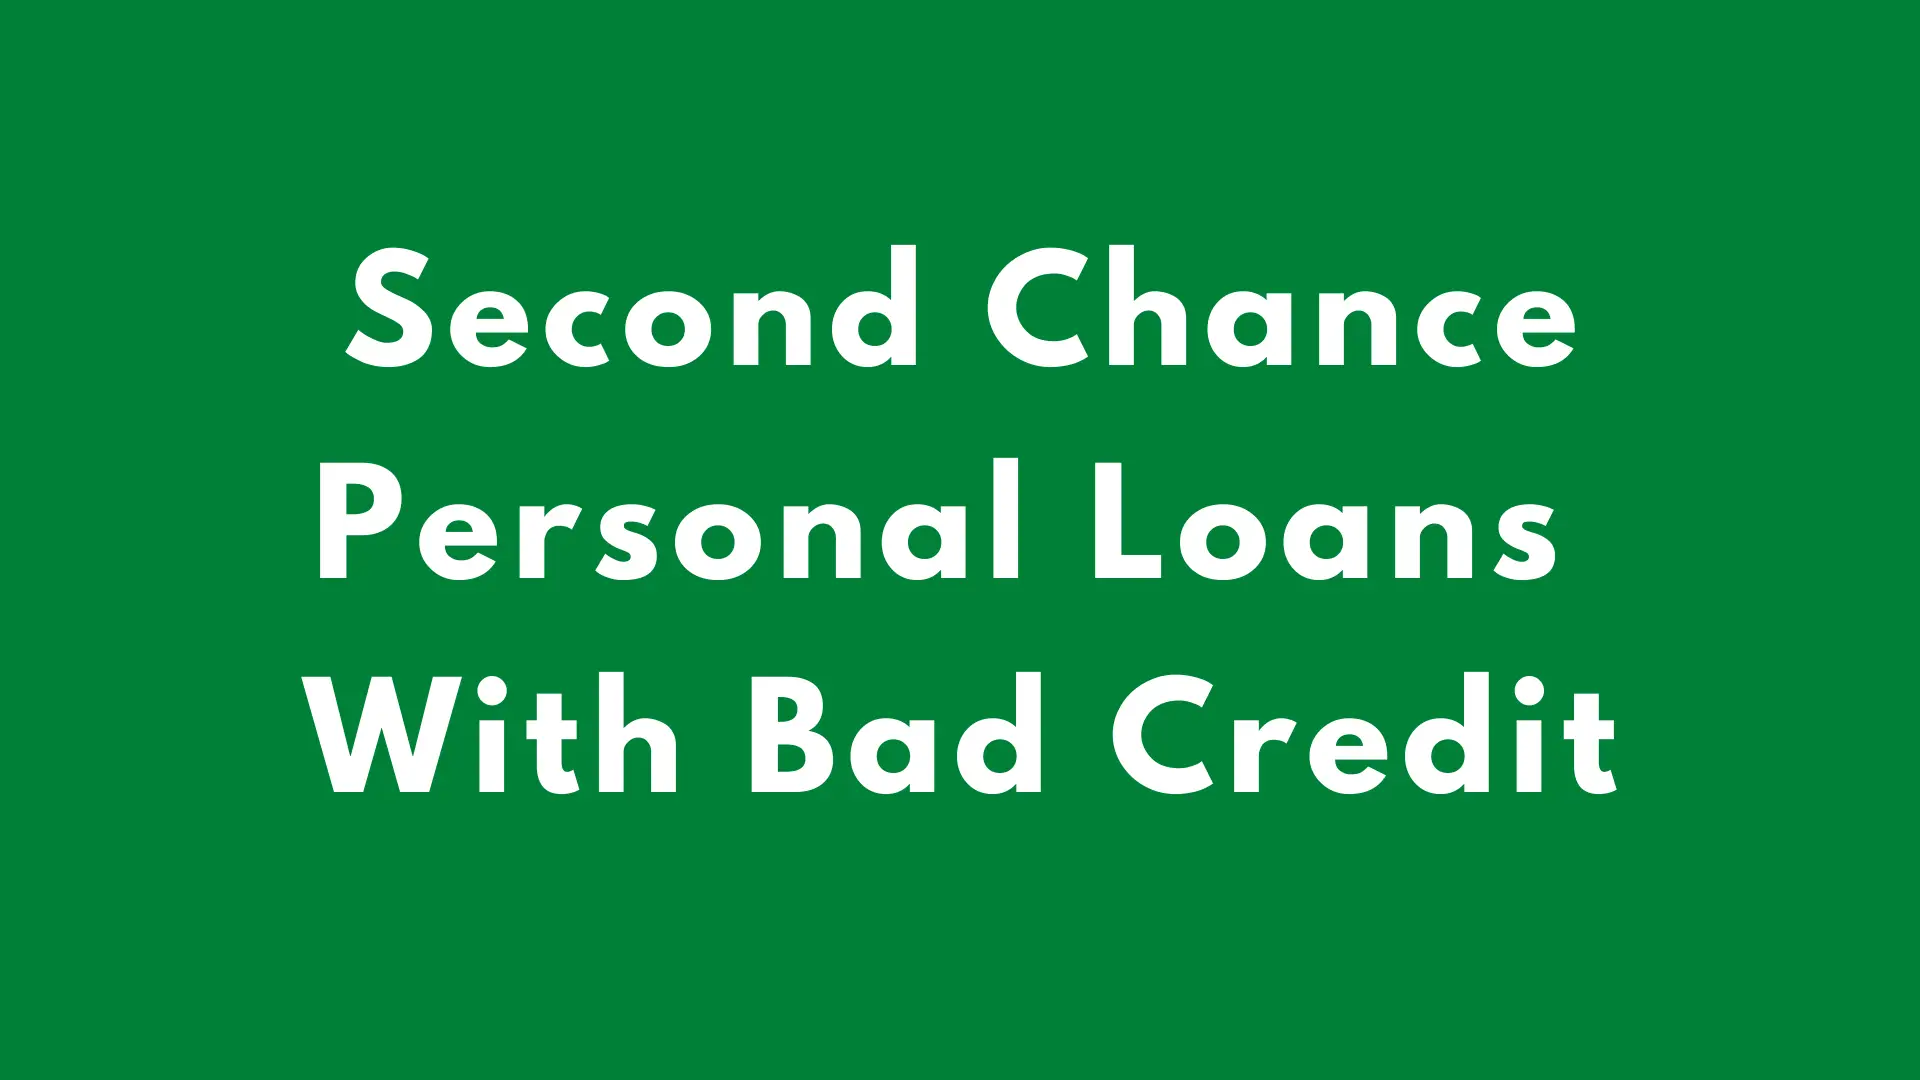 Second Chance Personal Loans With Bad Credit